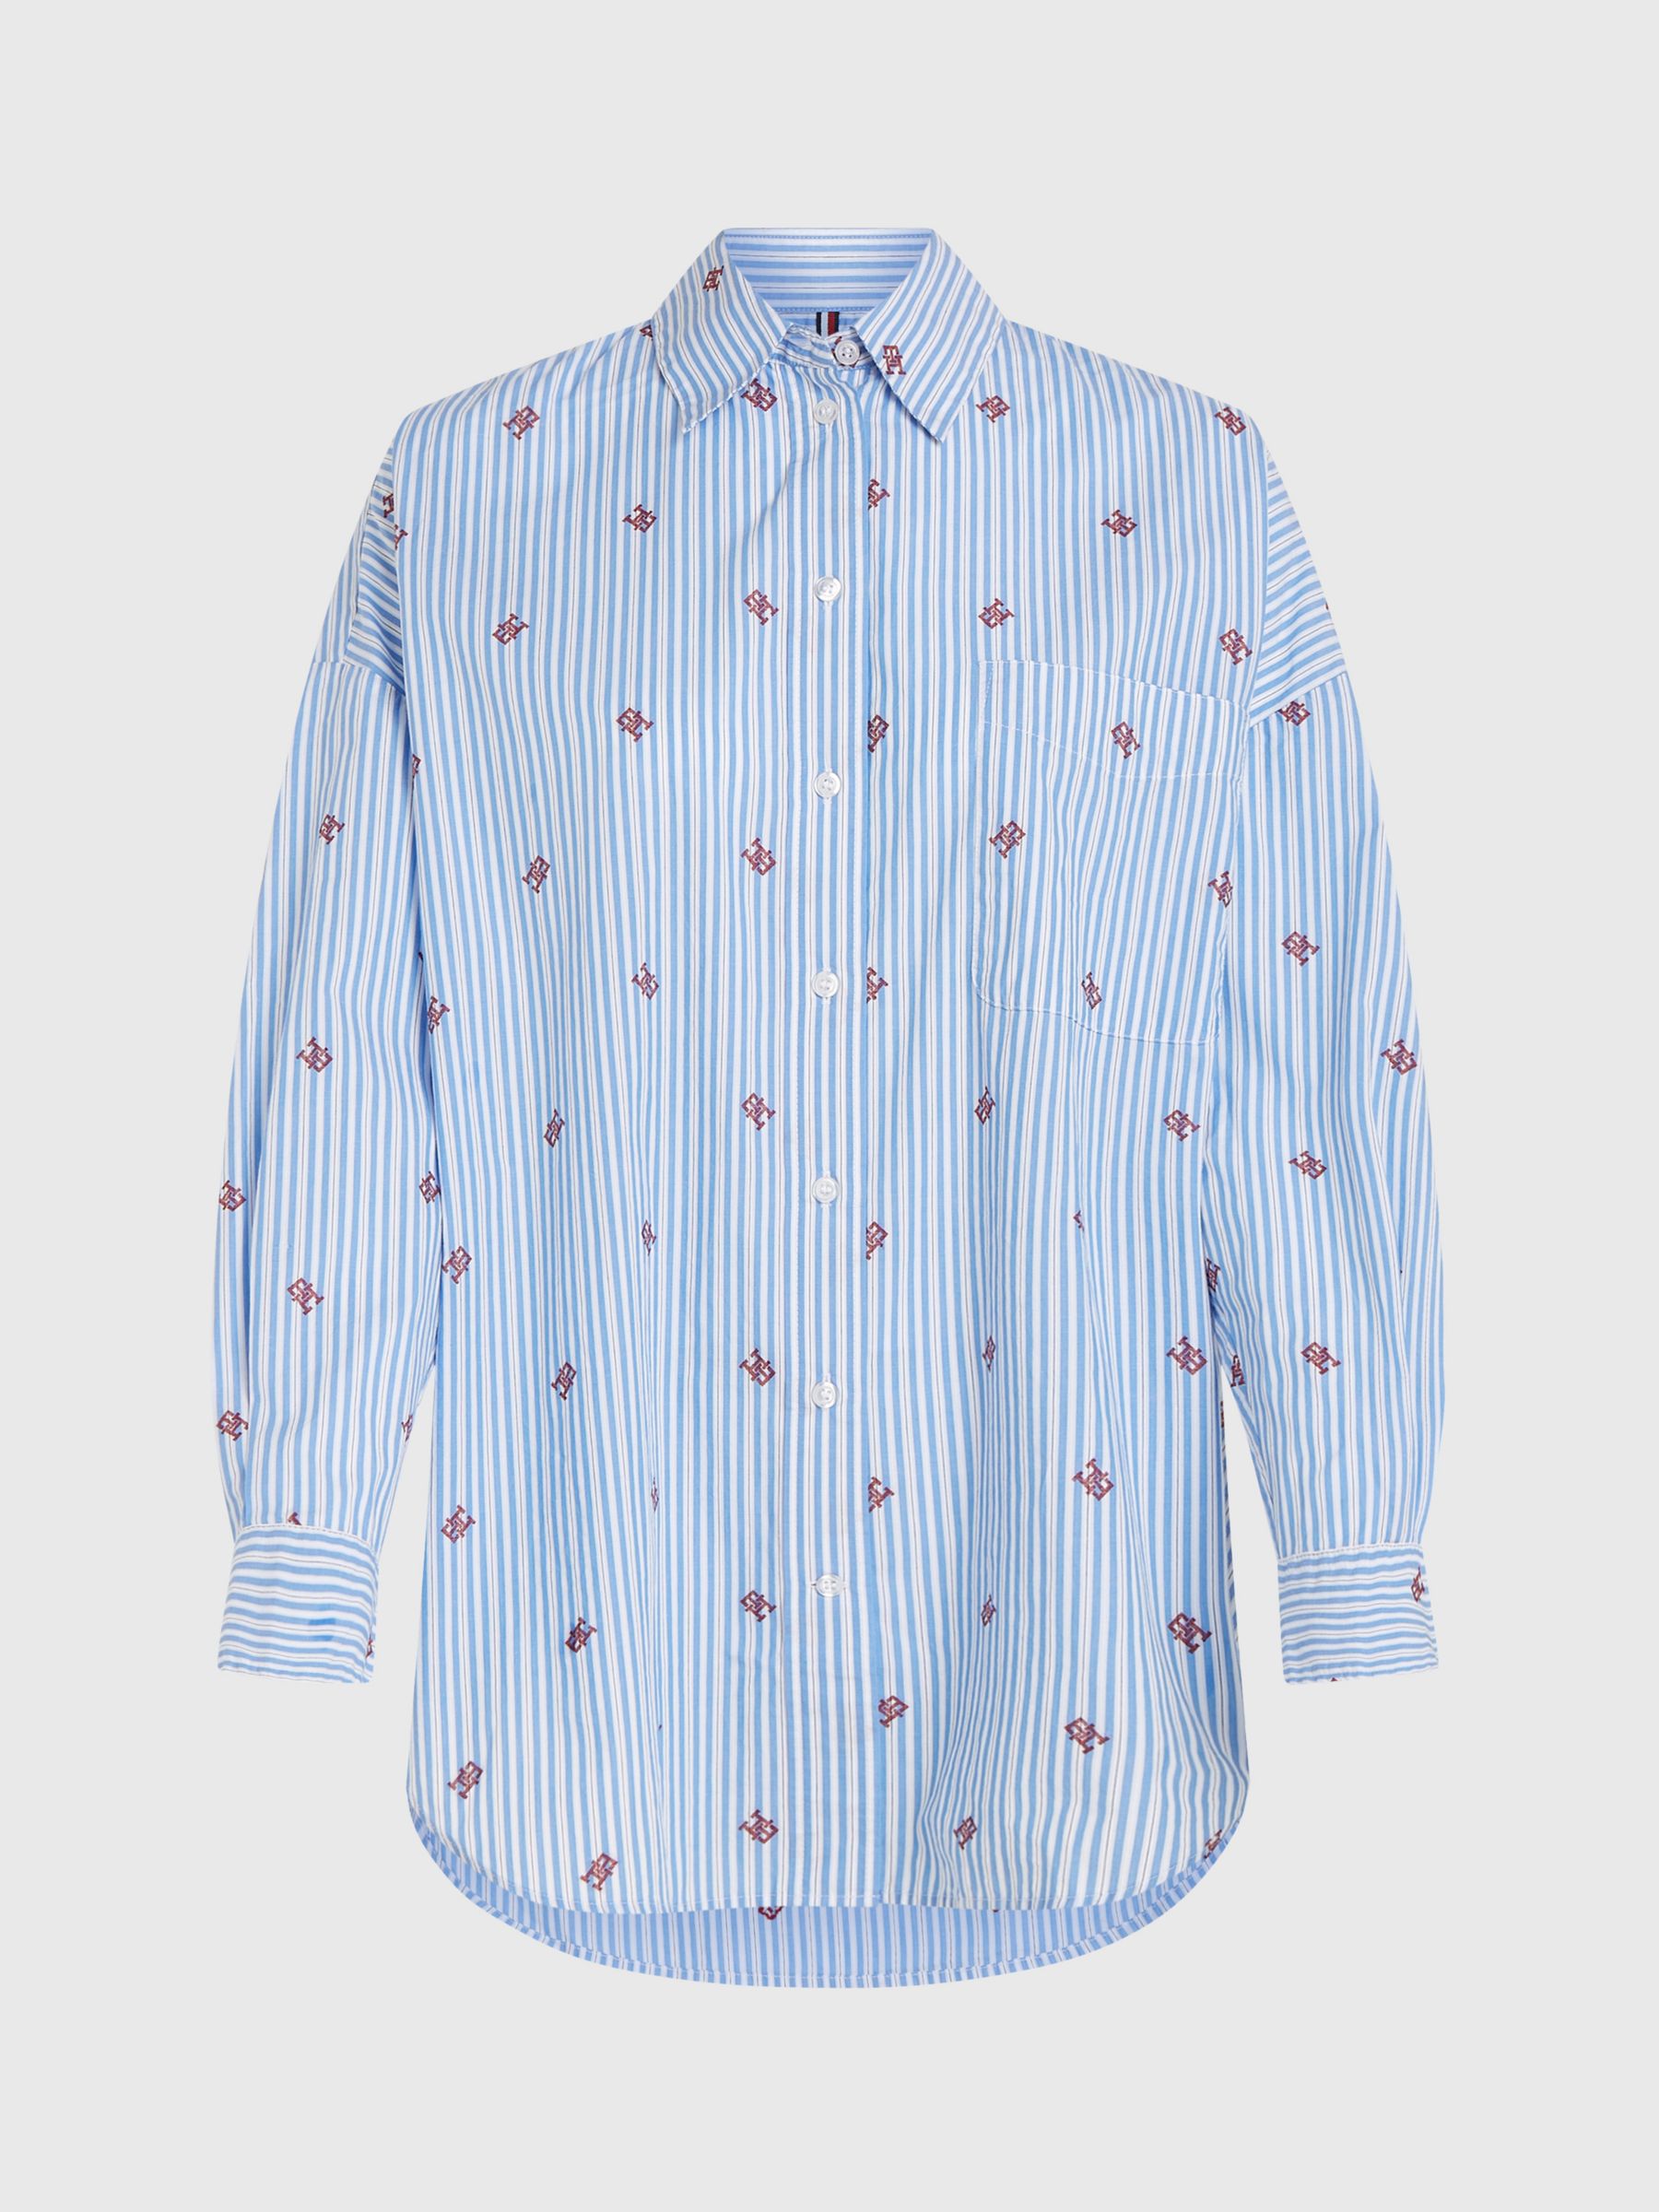 Buy Women's Shirts Tommy Hilfiger Oxford Shirt Tops Online